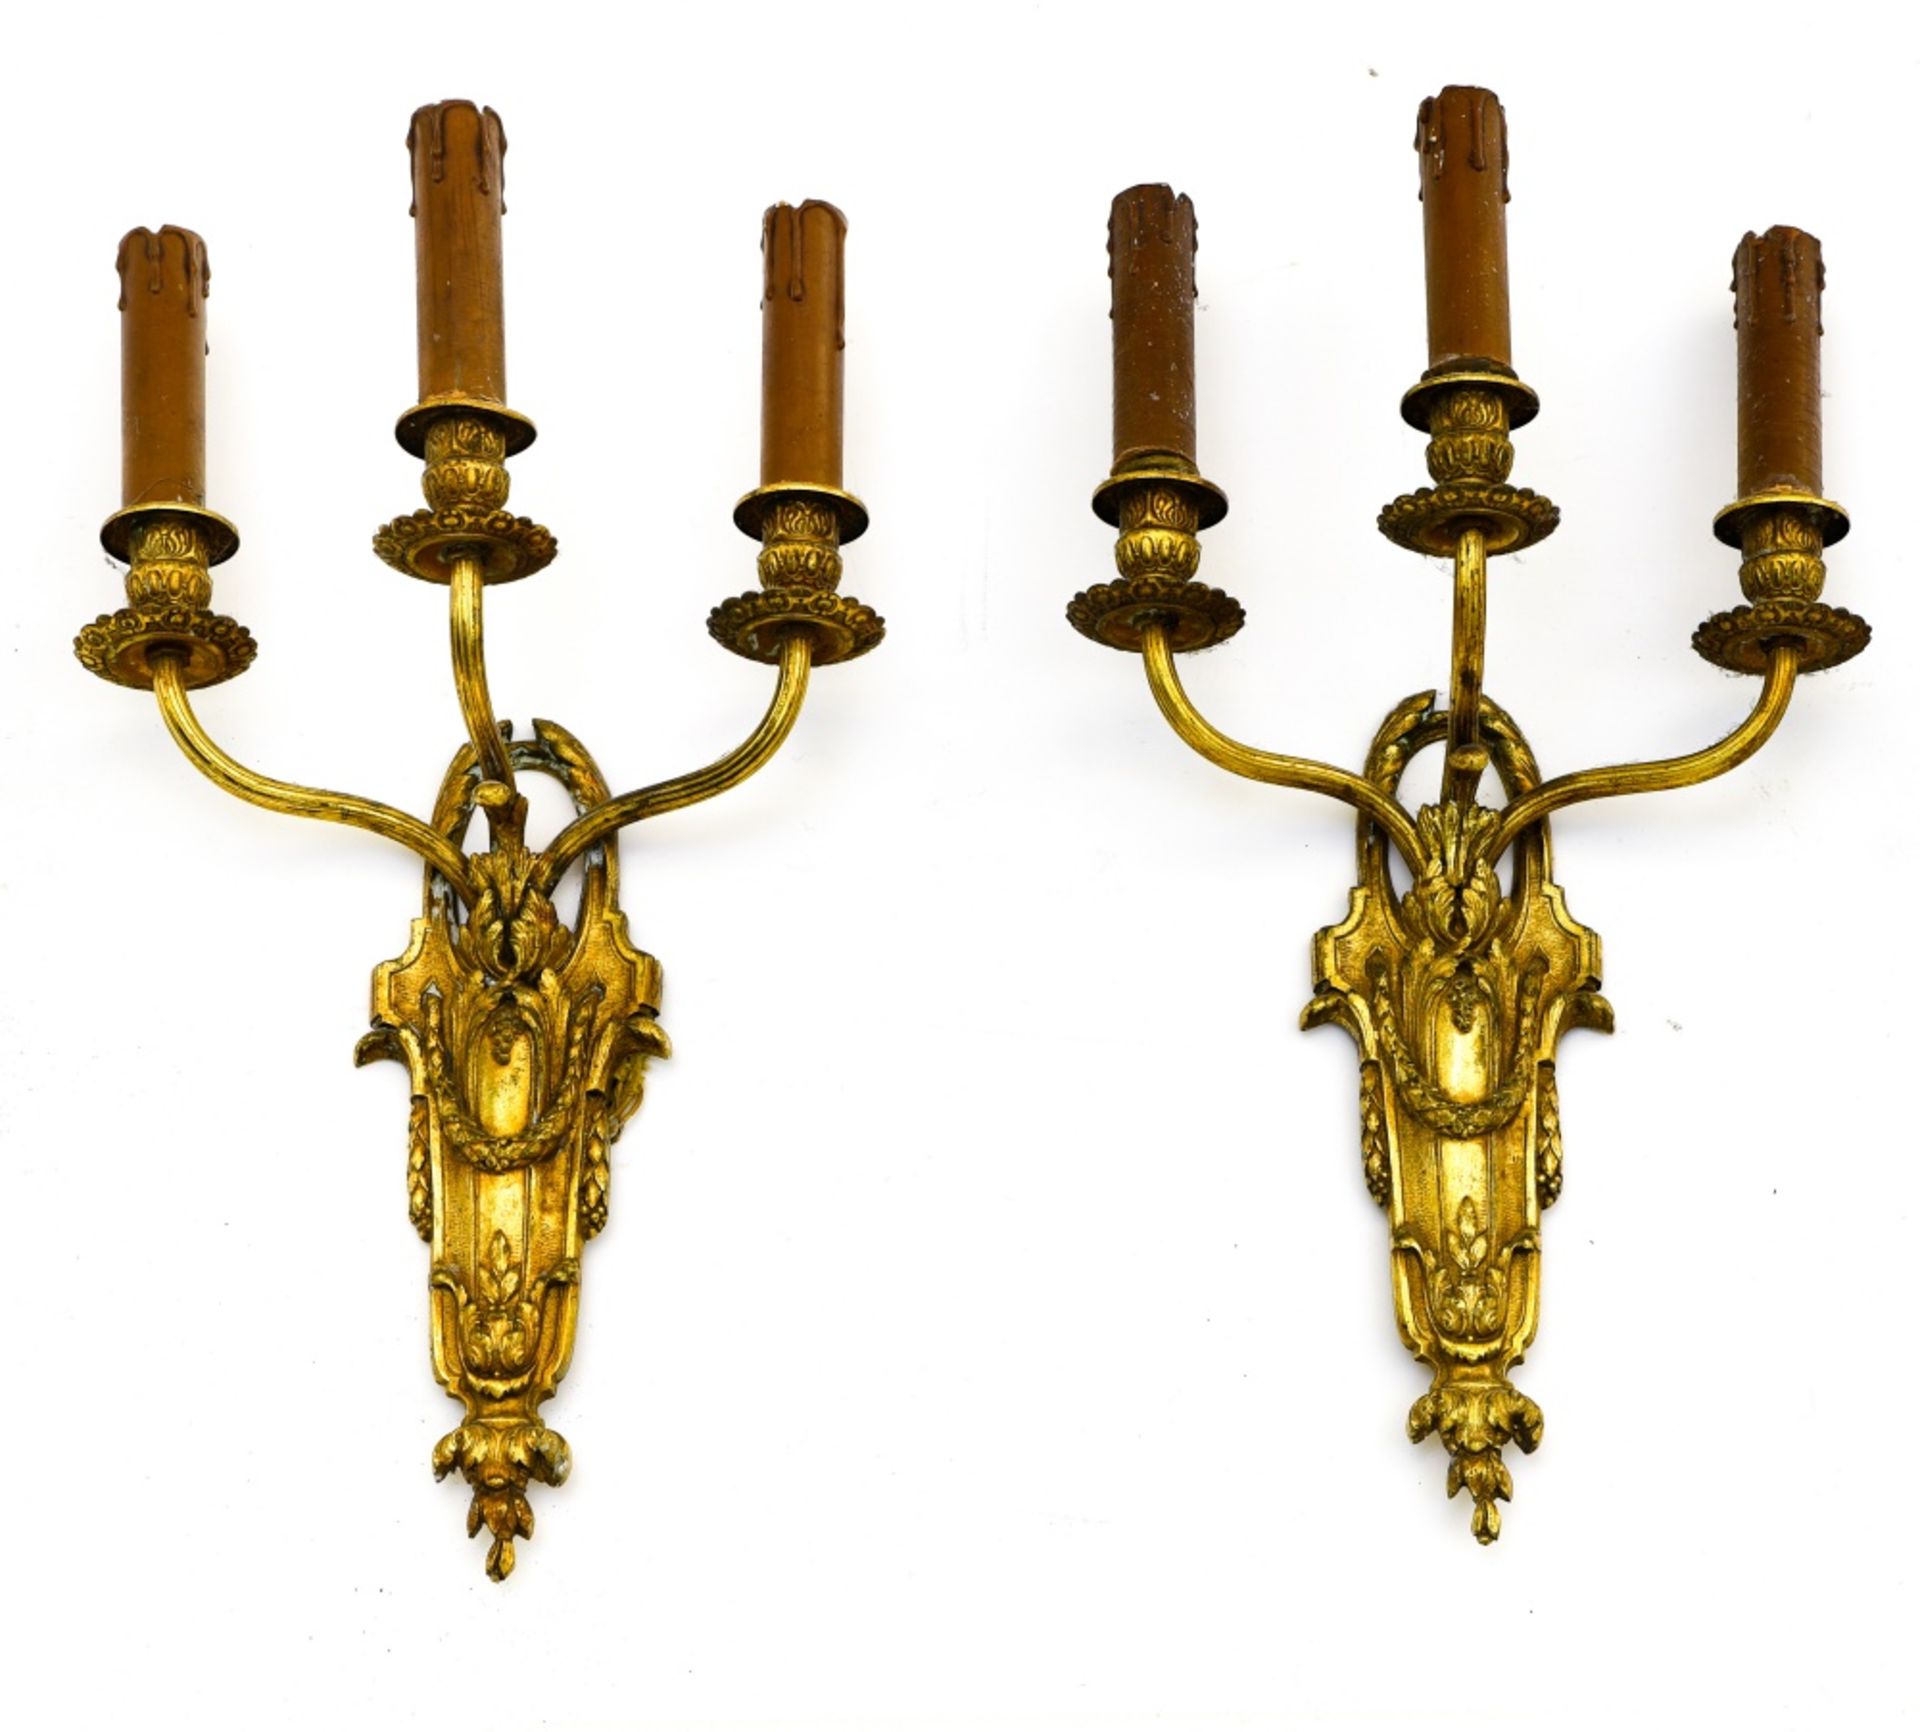 Early 20th century work Pair of sconces, Gilt bronze with three arms. Height (cm) : 44 - Width (cm)